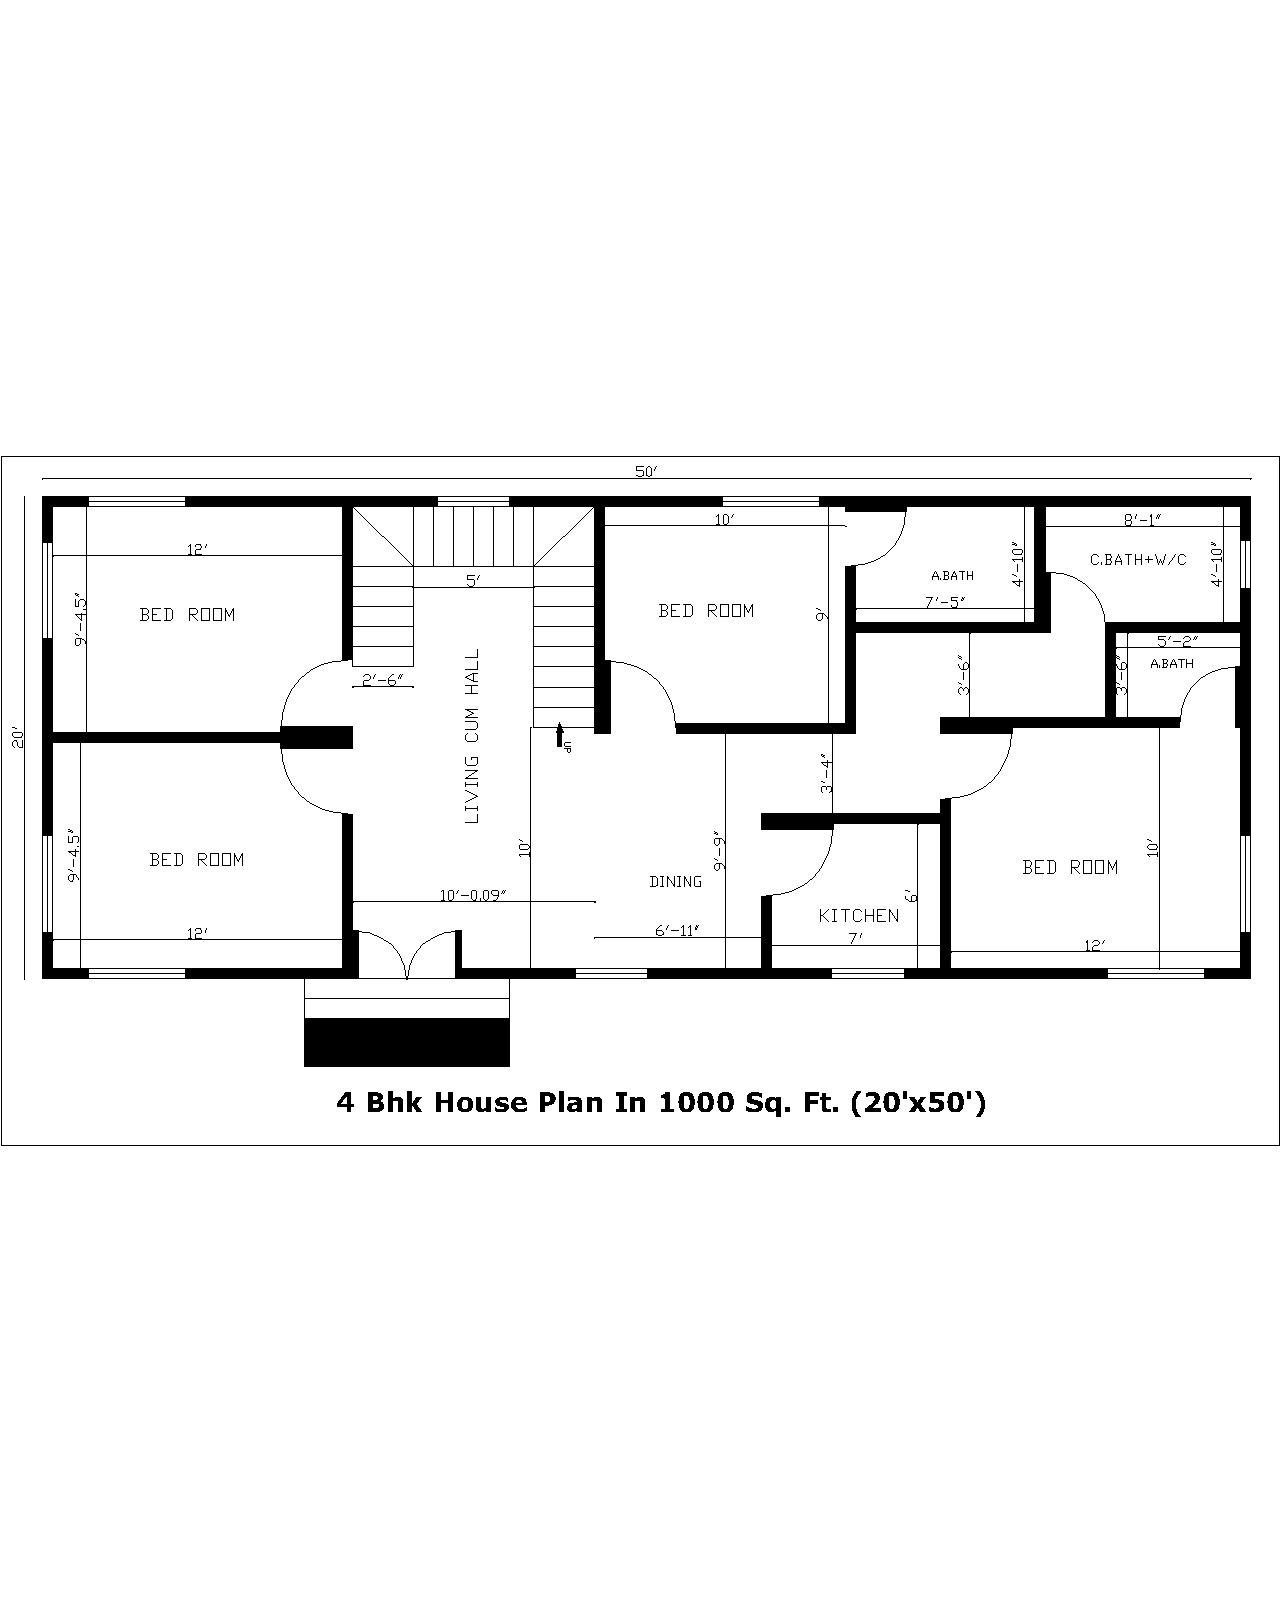 4 Bhk House Plan In 1000 Sq. Ft. (20'x50')